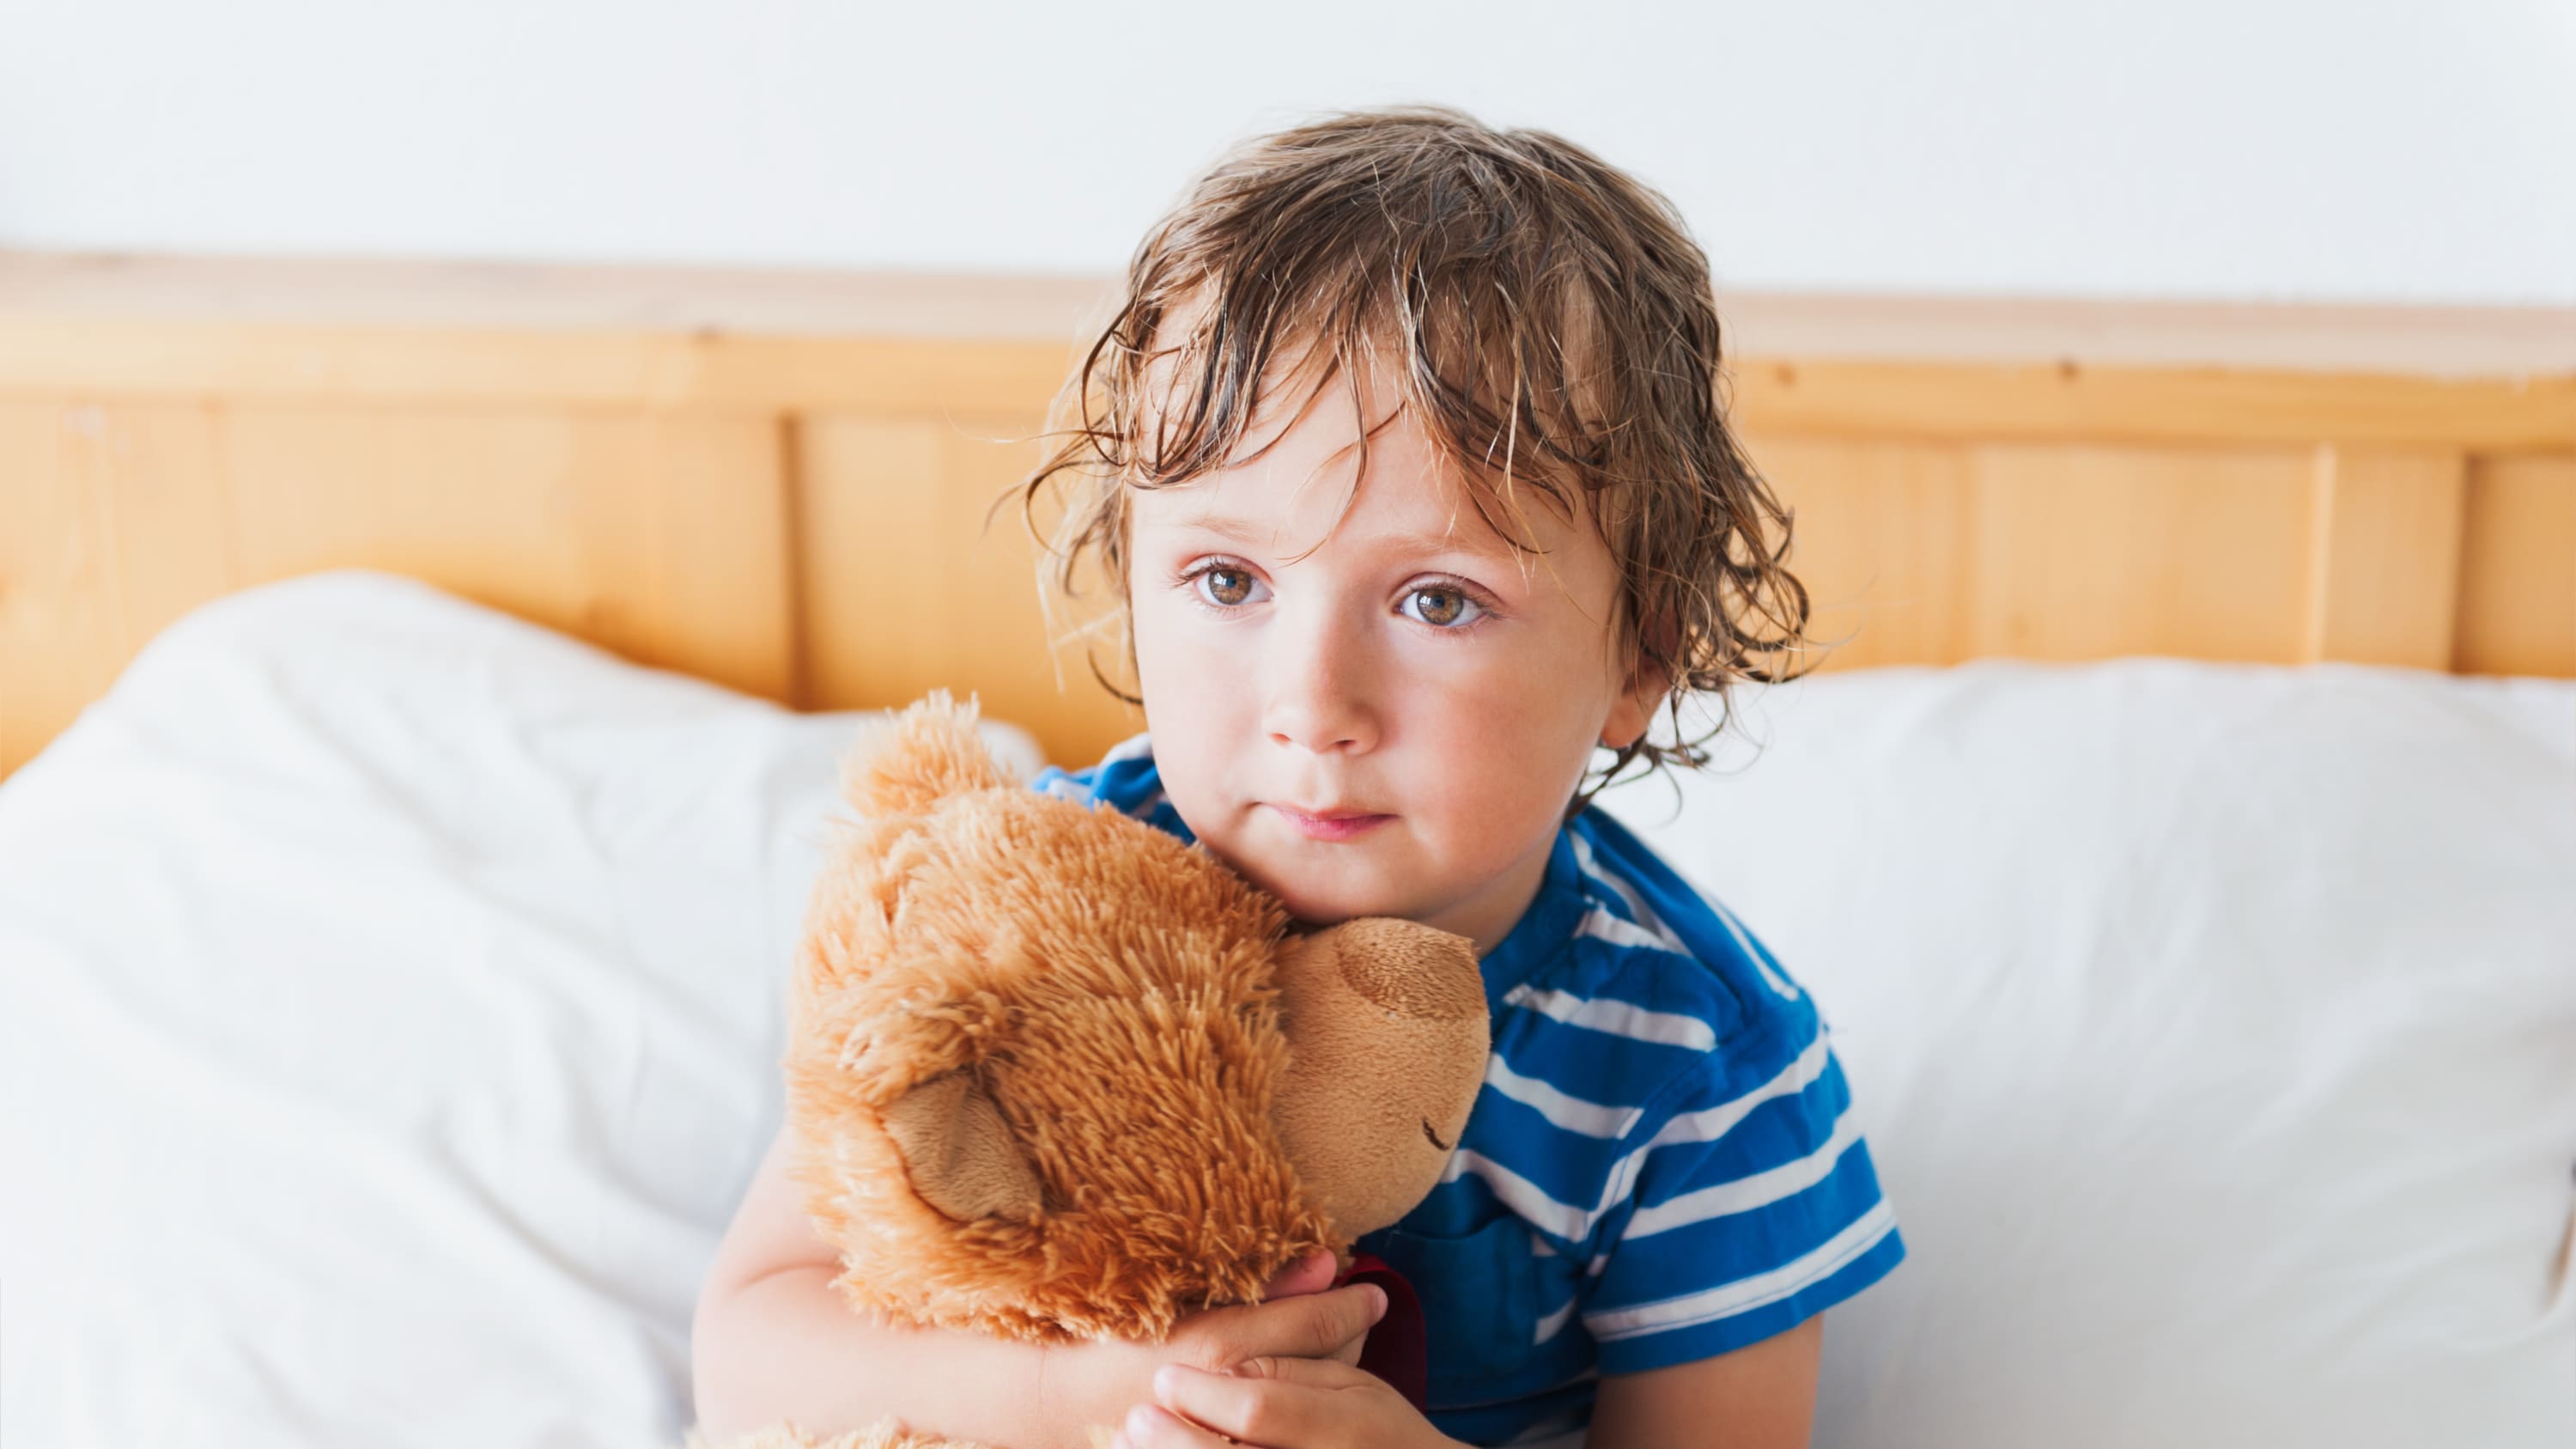 A child who may need care from a pediatric urology specialist.